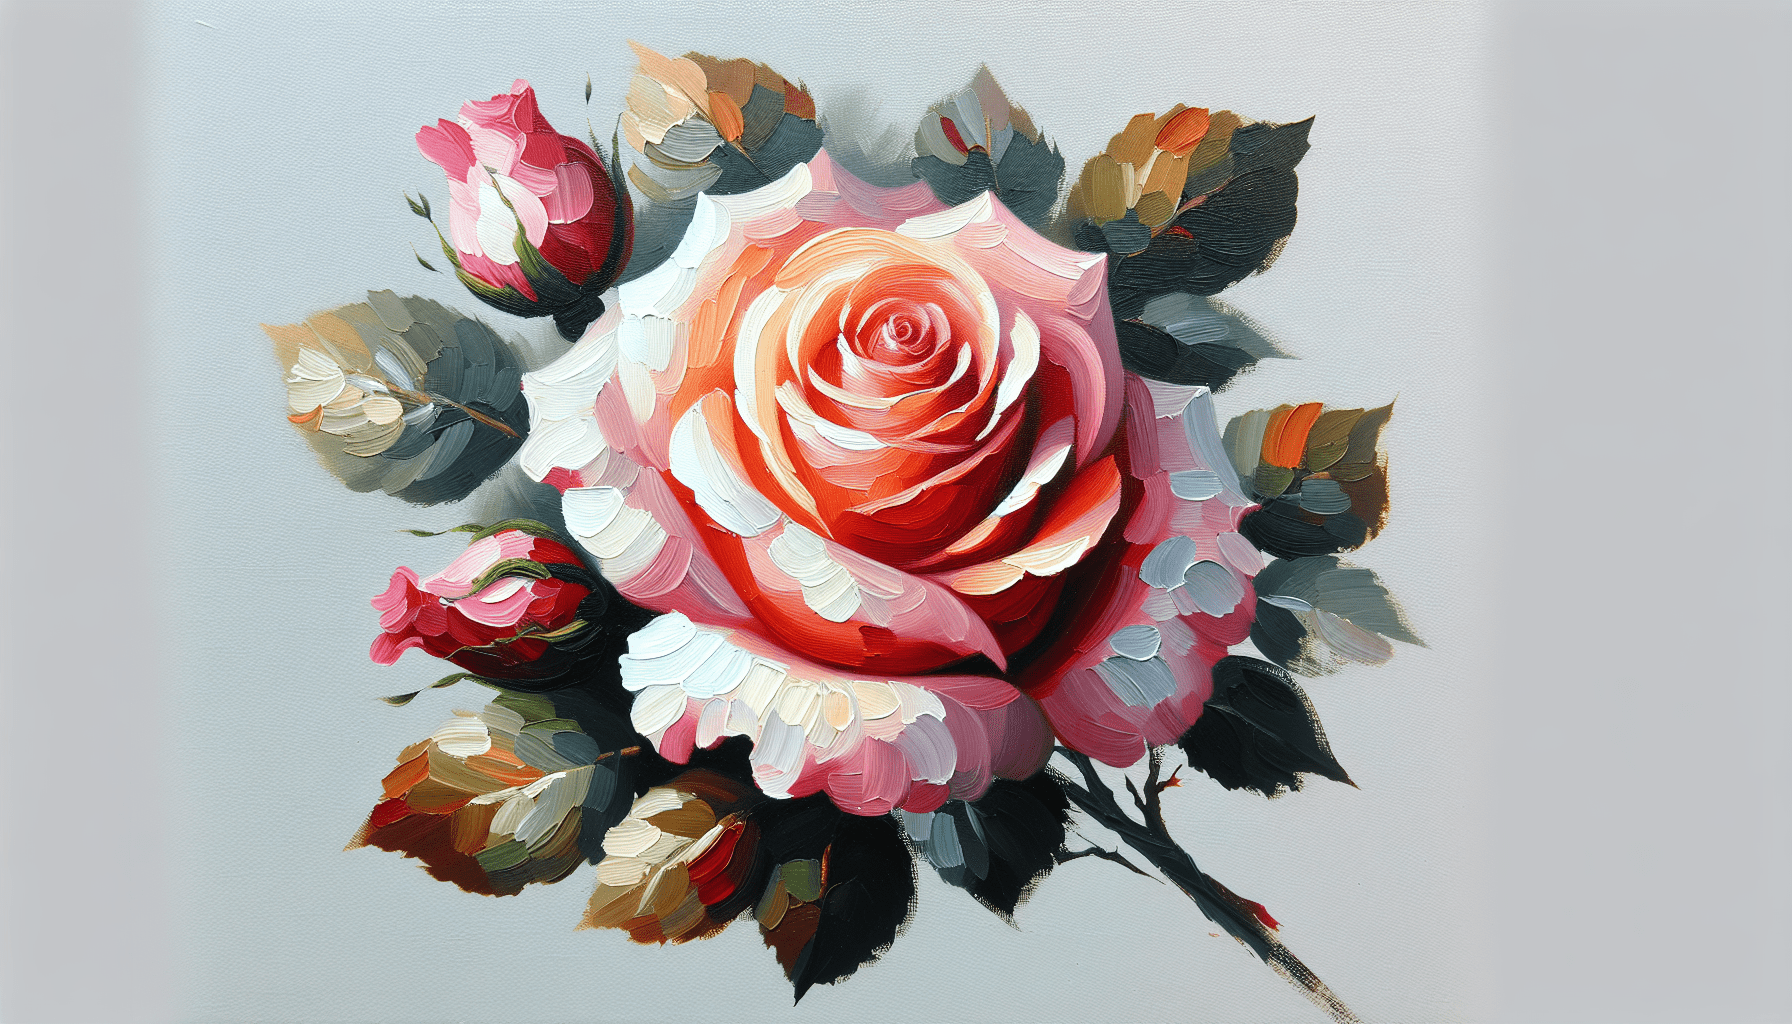 How To Paint A Rose In Oil